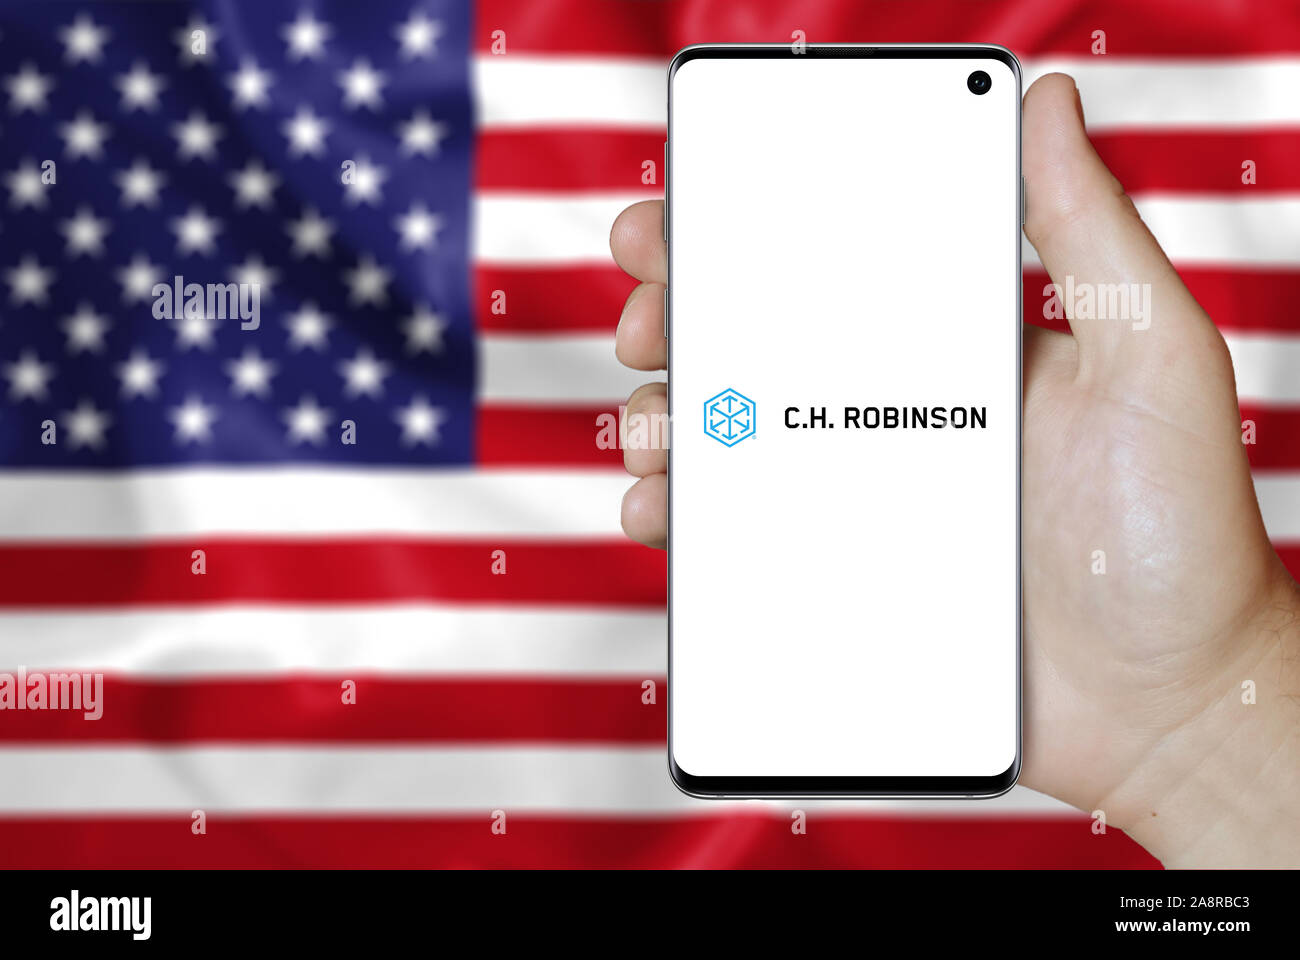 Logo of public company C. H. Robinson Worldwide displayed on a smartphone. Flag of USA background. Credit: PIXDUCE Stock Photo